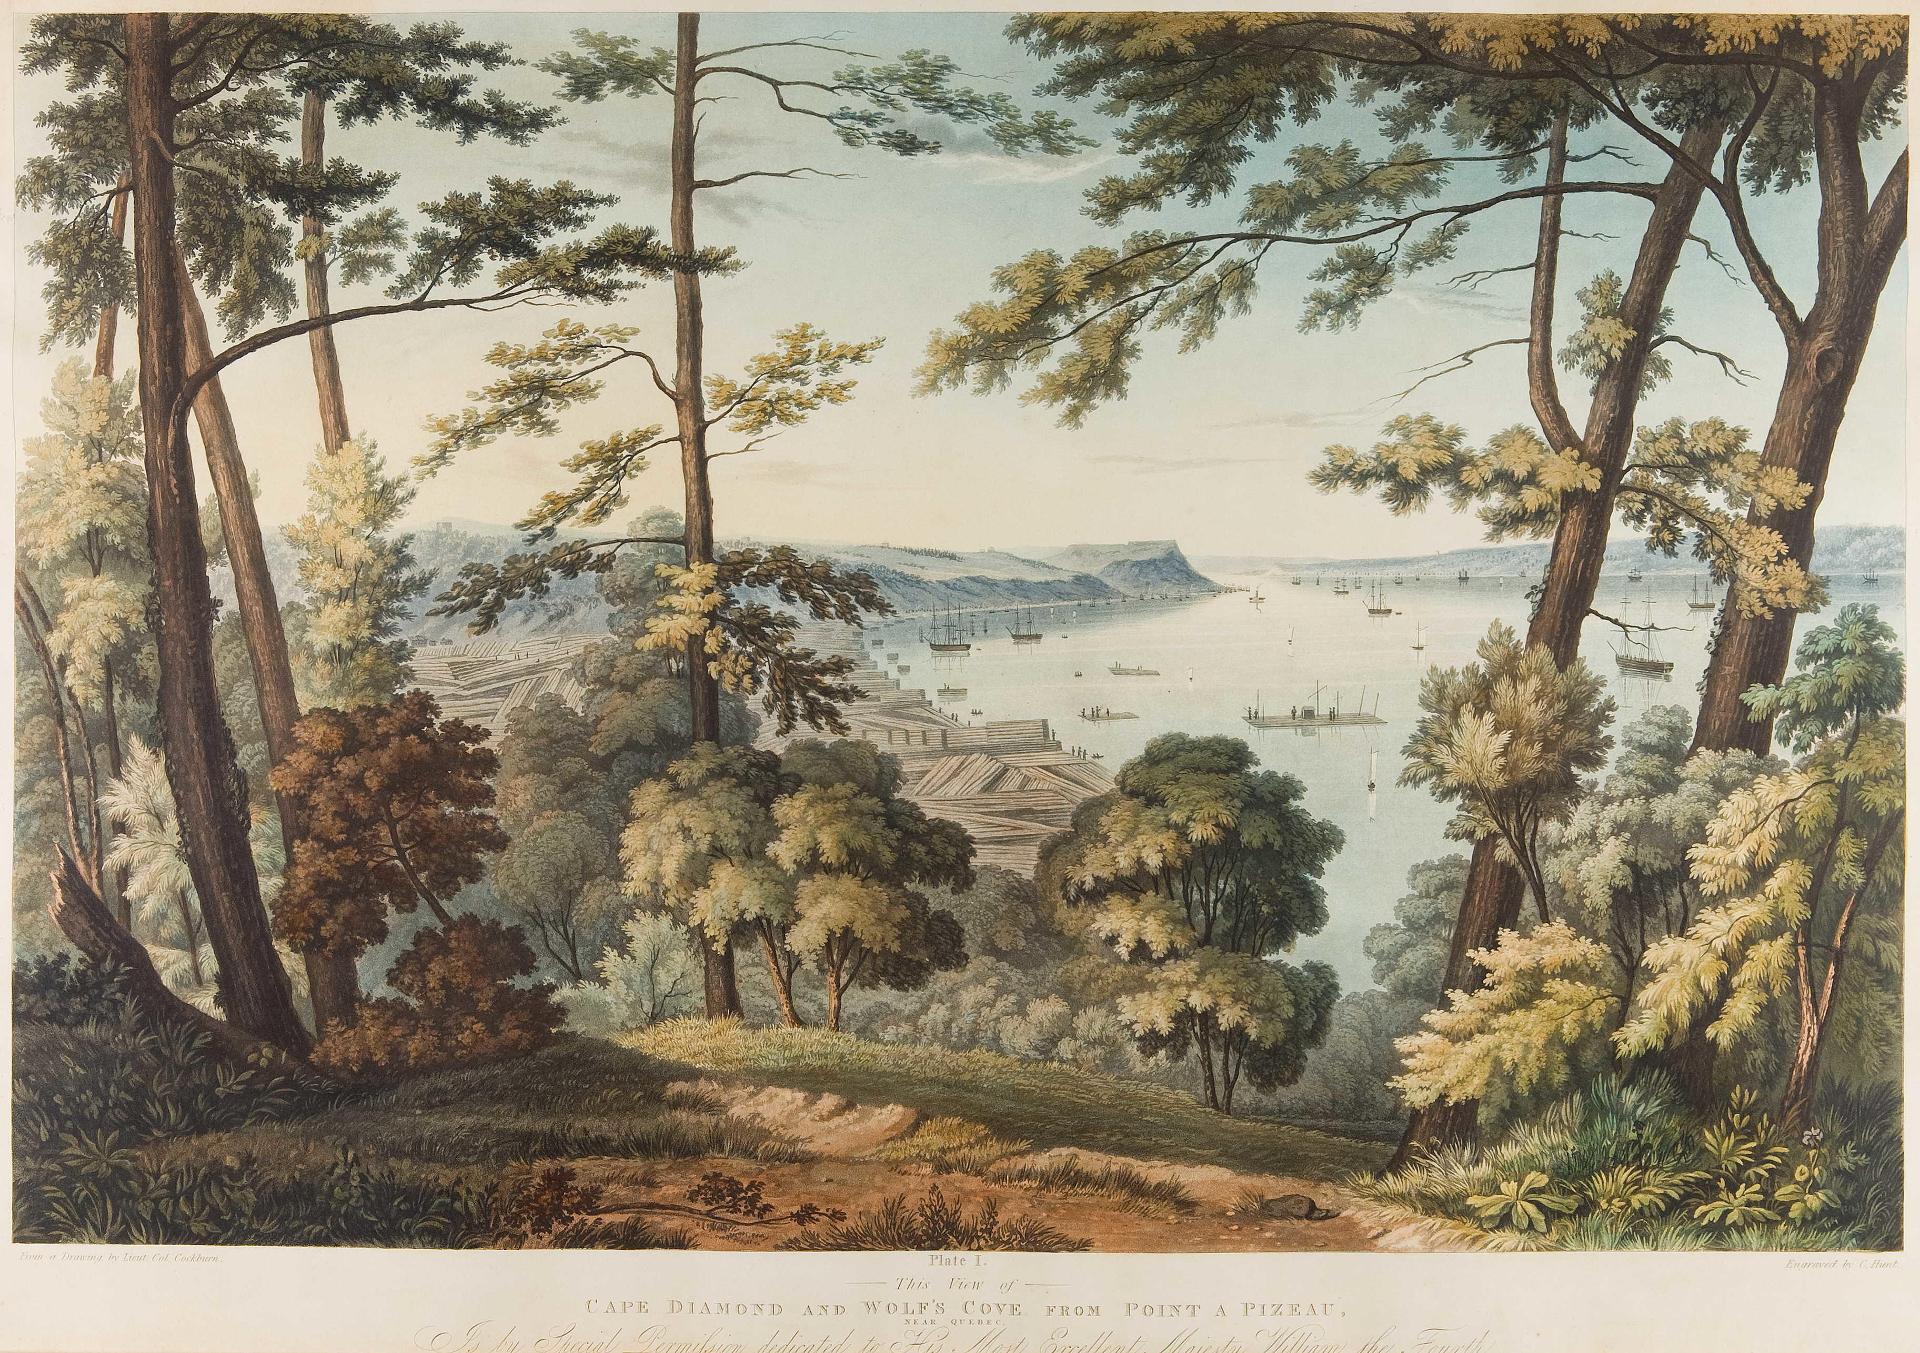 James Pattison Cockburn (1778-1847) - Cape Diamond and Wolf’s Cove From Point A Pizeau Plate 1, by C.Hunt, published by Ackermann & Co., London 1833